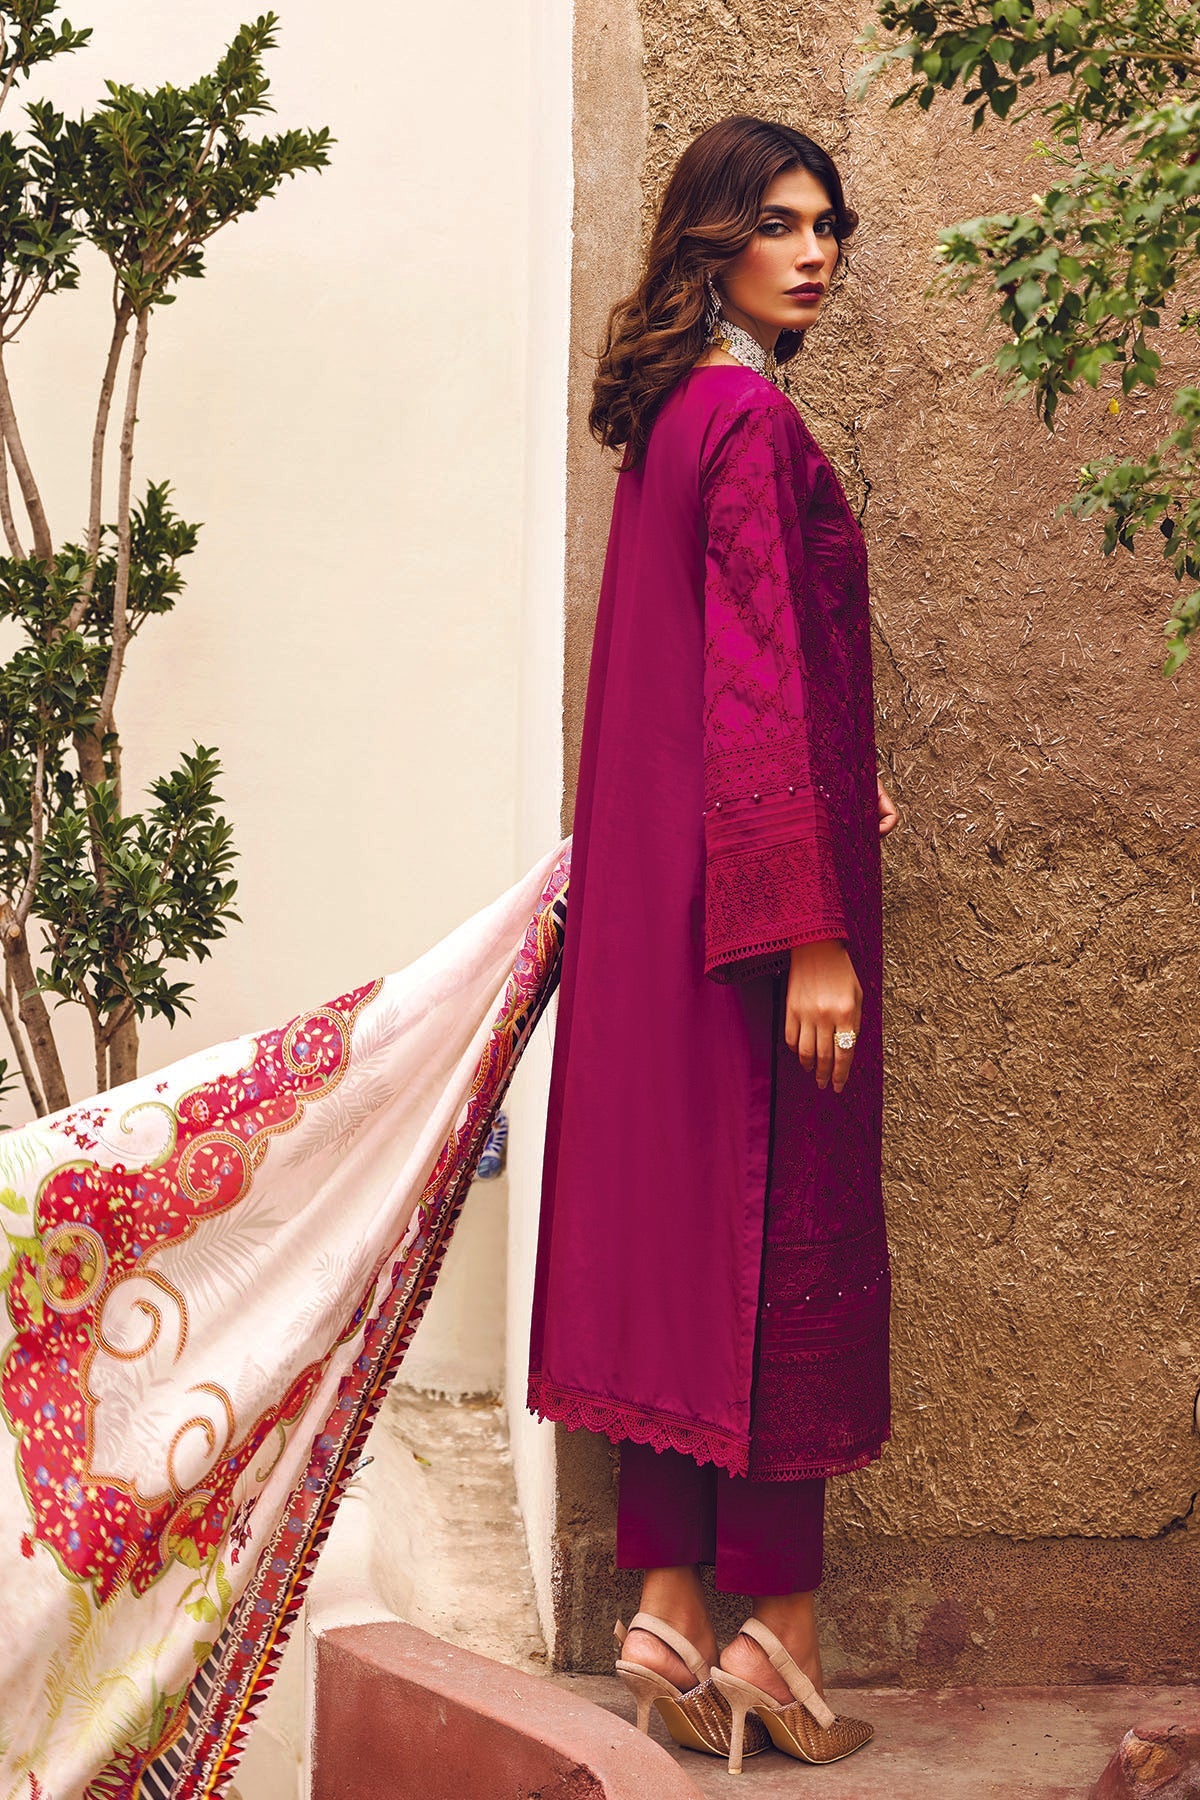 3979-ARZOU EMBROIDERED LAWN UNSTITCHED